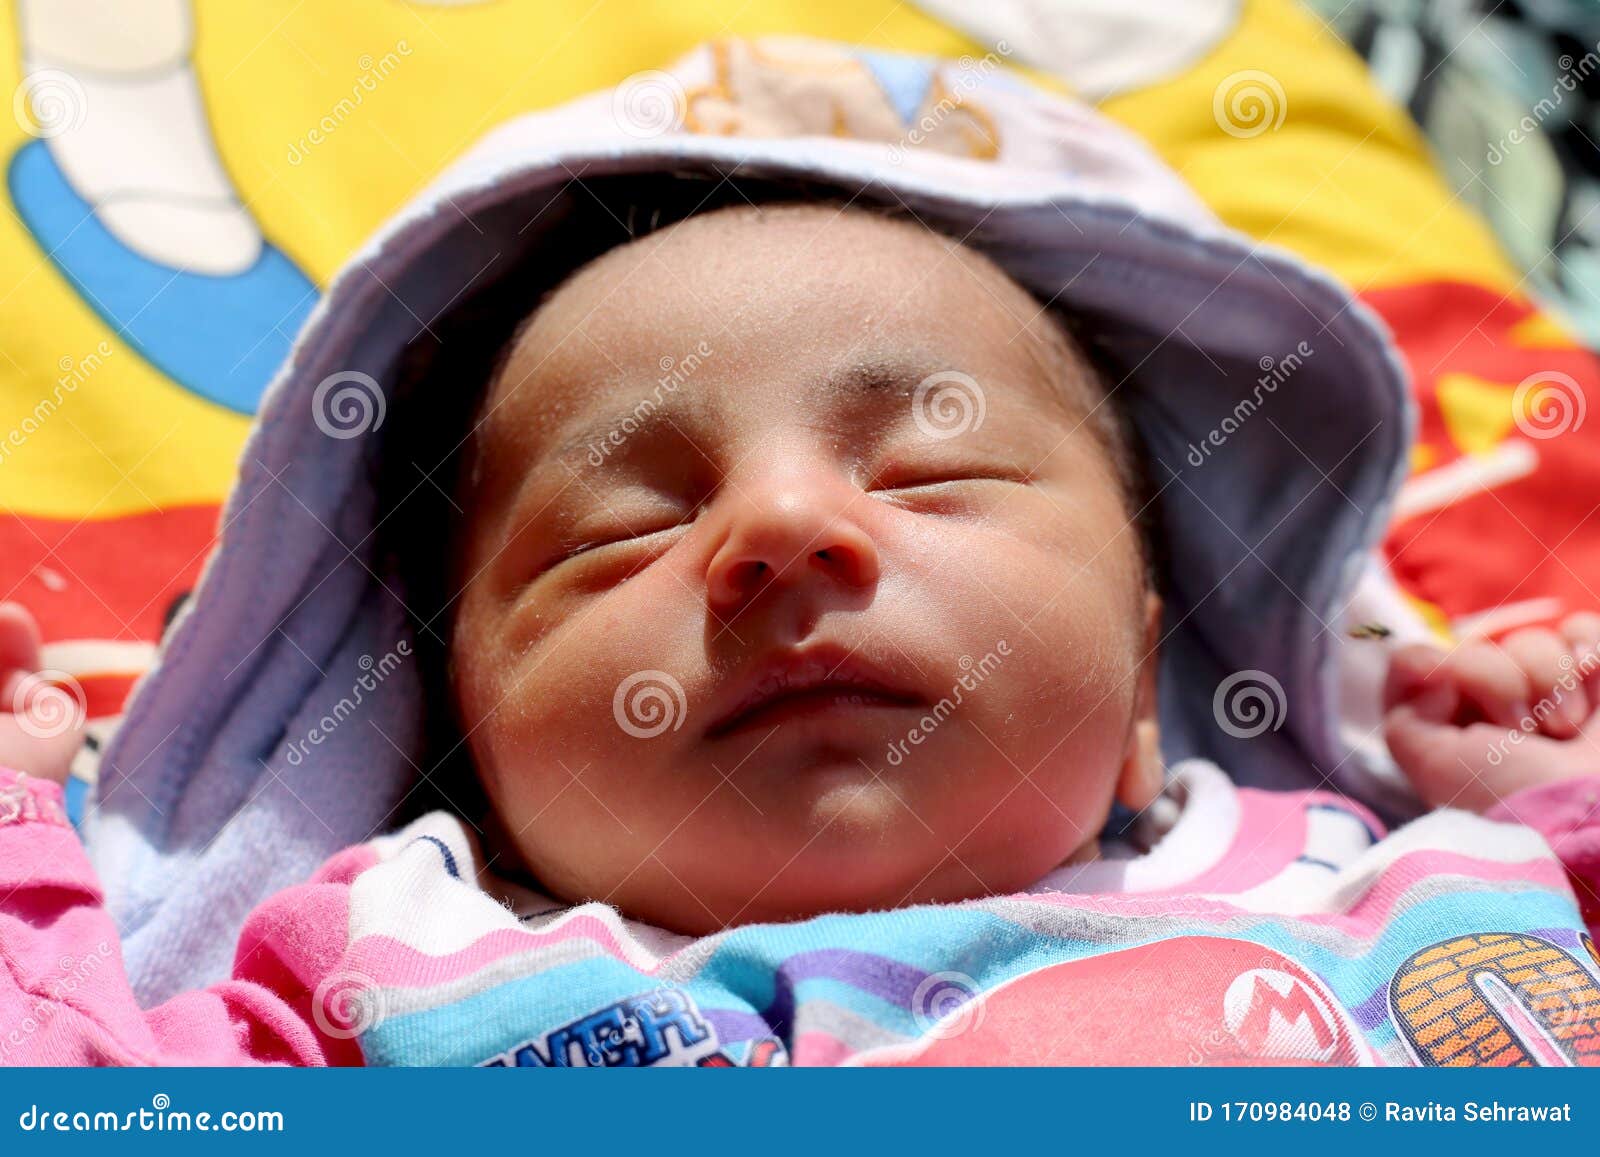 New Born Cute Baby Sleeping Portrait Looking so Lovely. Stock ...